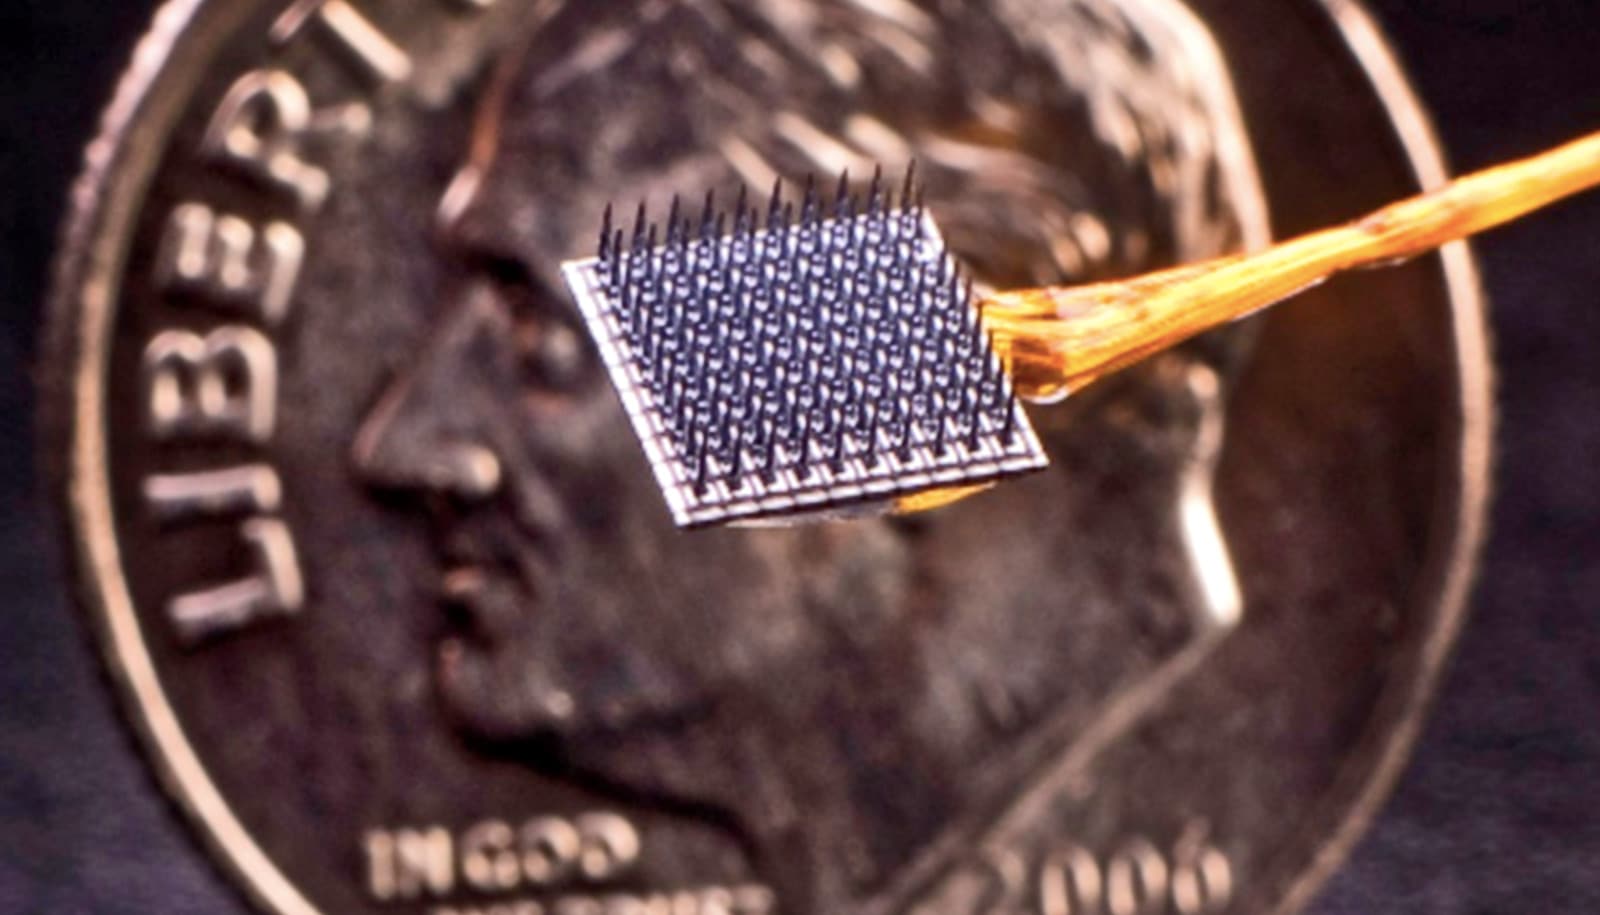 The brain-computer interface implant is a square, spike-covered chip held in front of a penny for scale comparison.